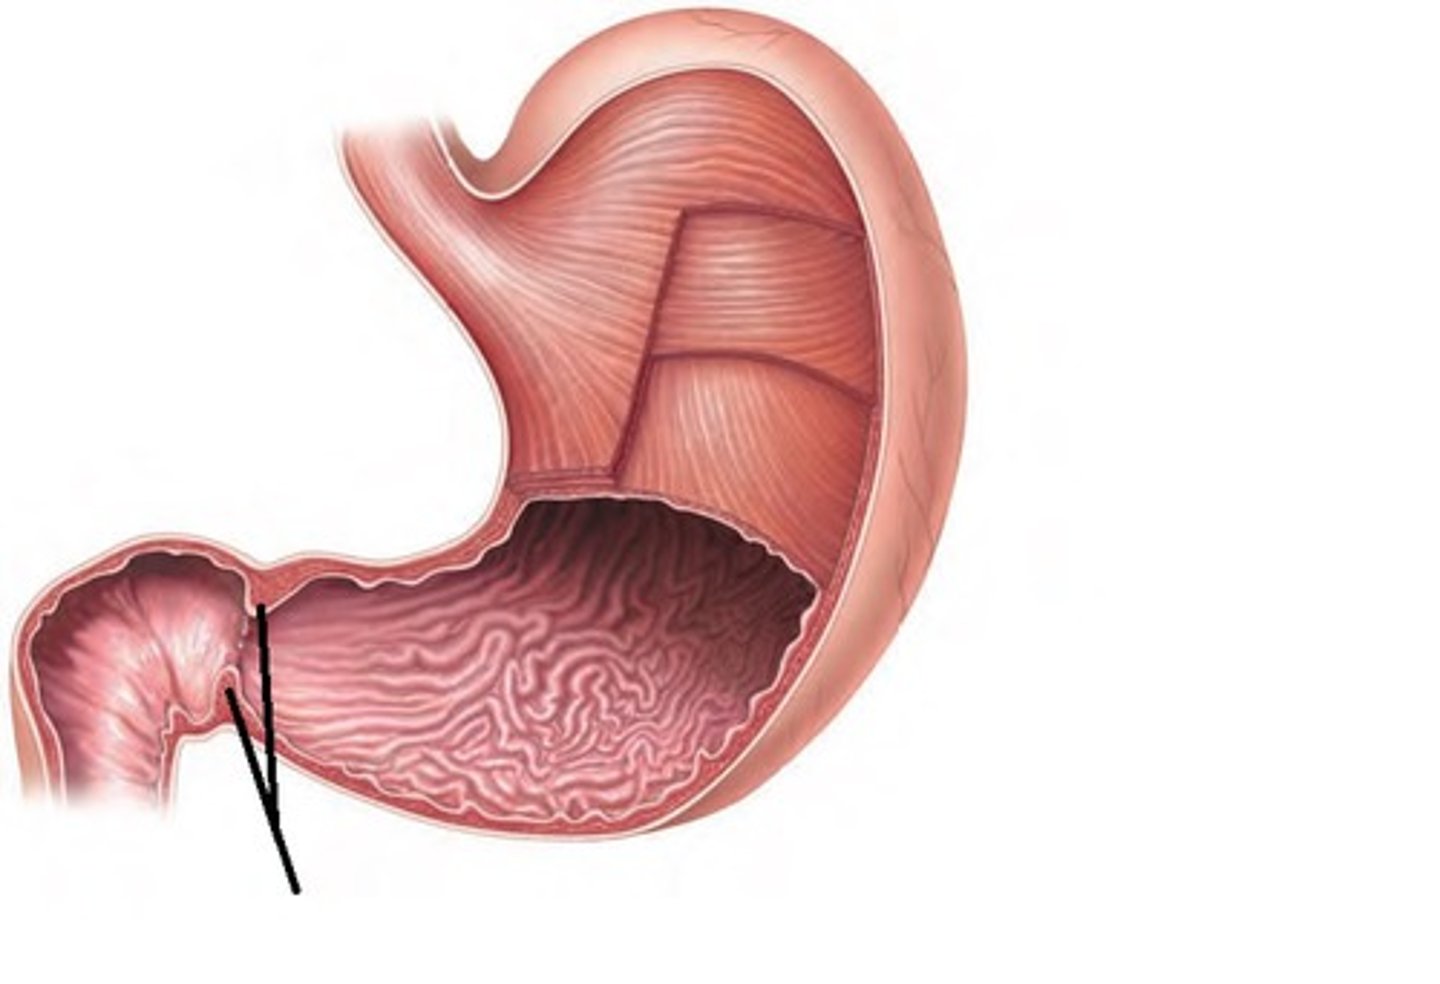 <p>1. The sphincter between the stomach and the duodenum is the ...</p>